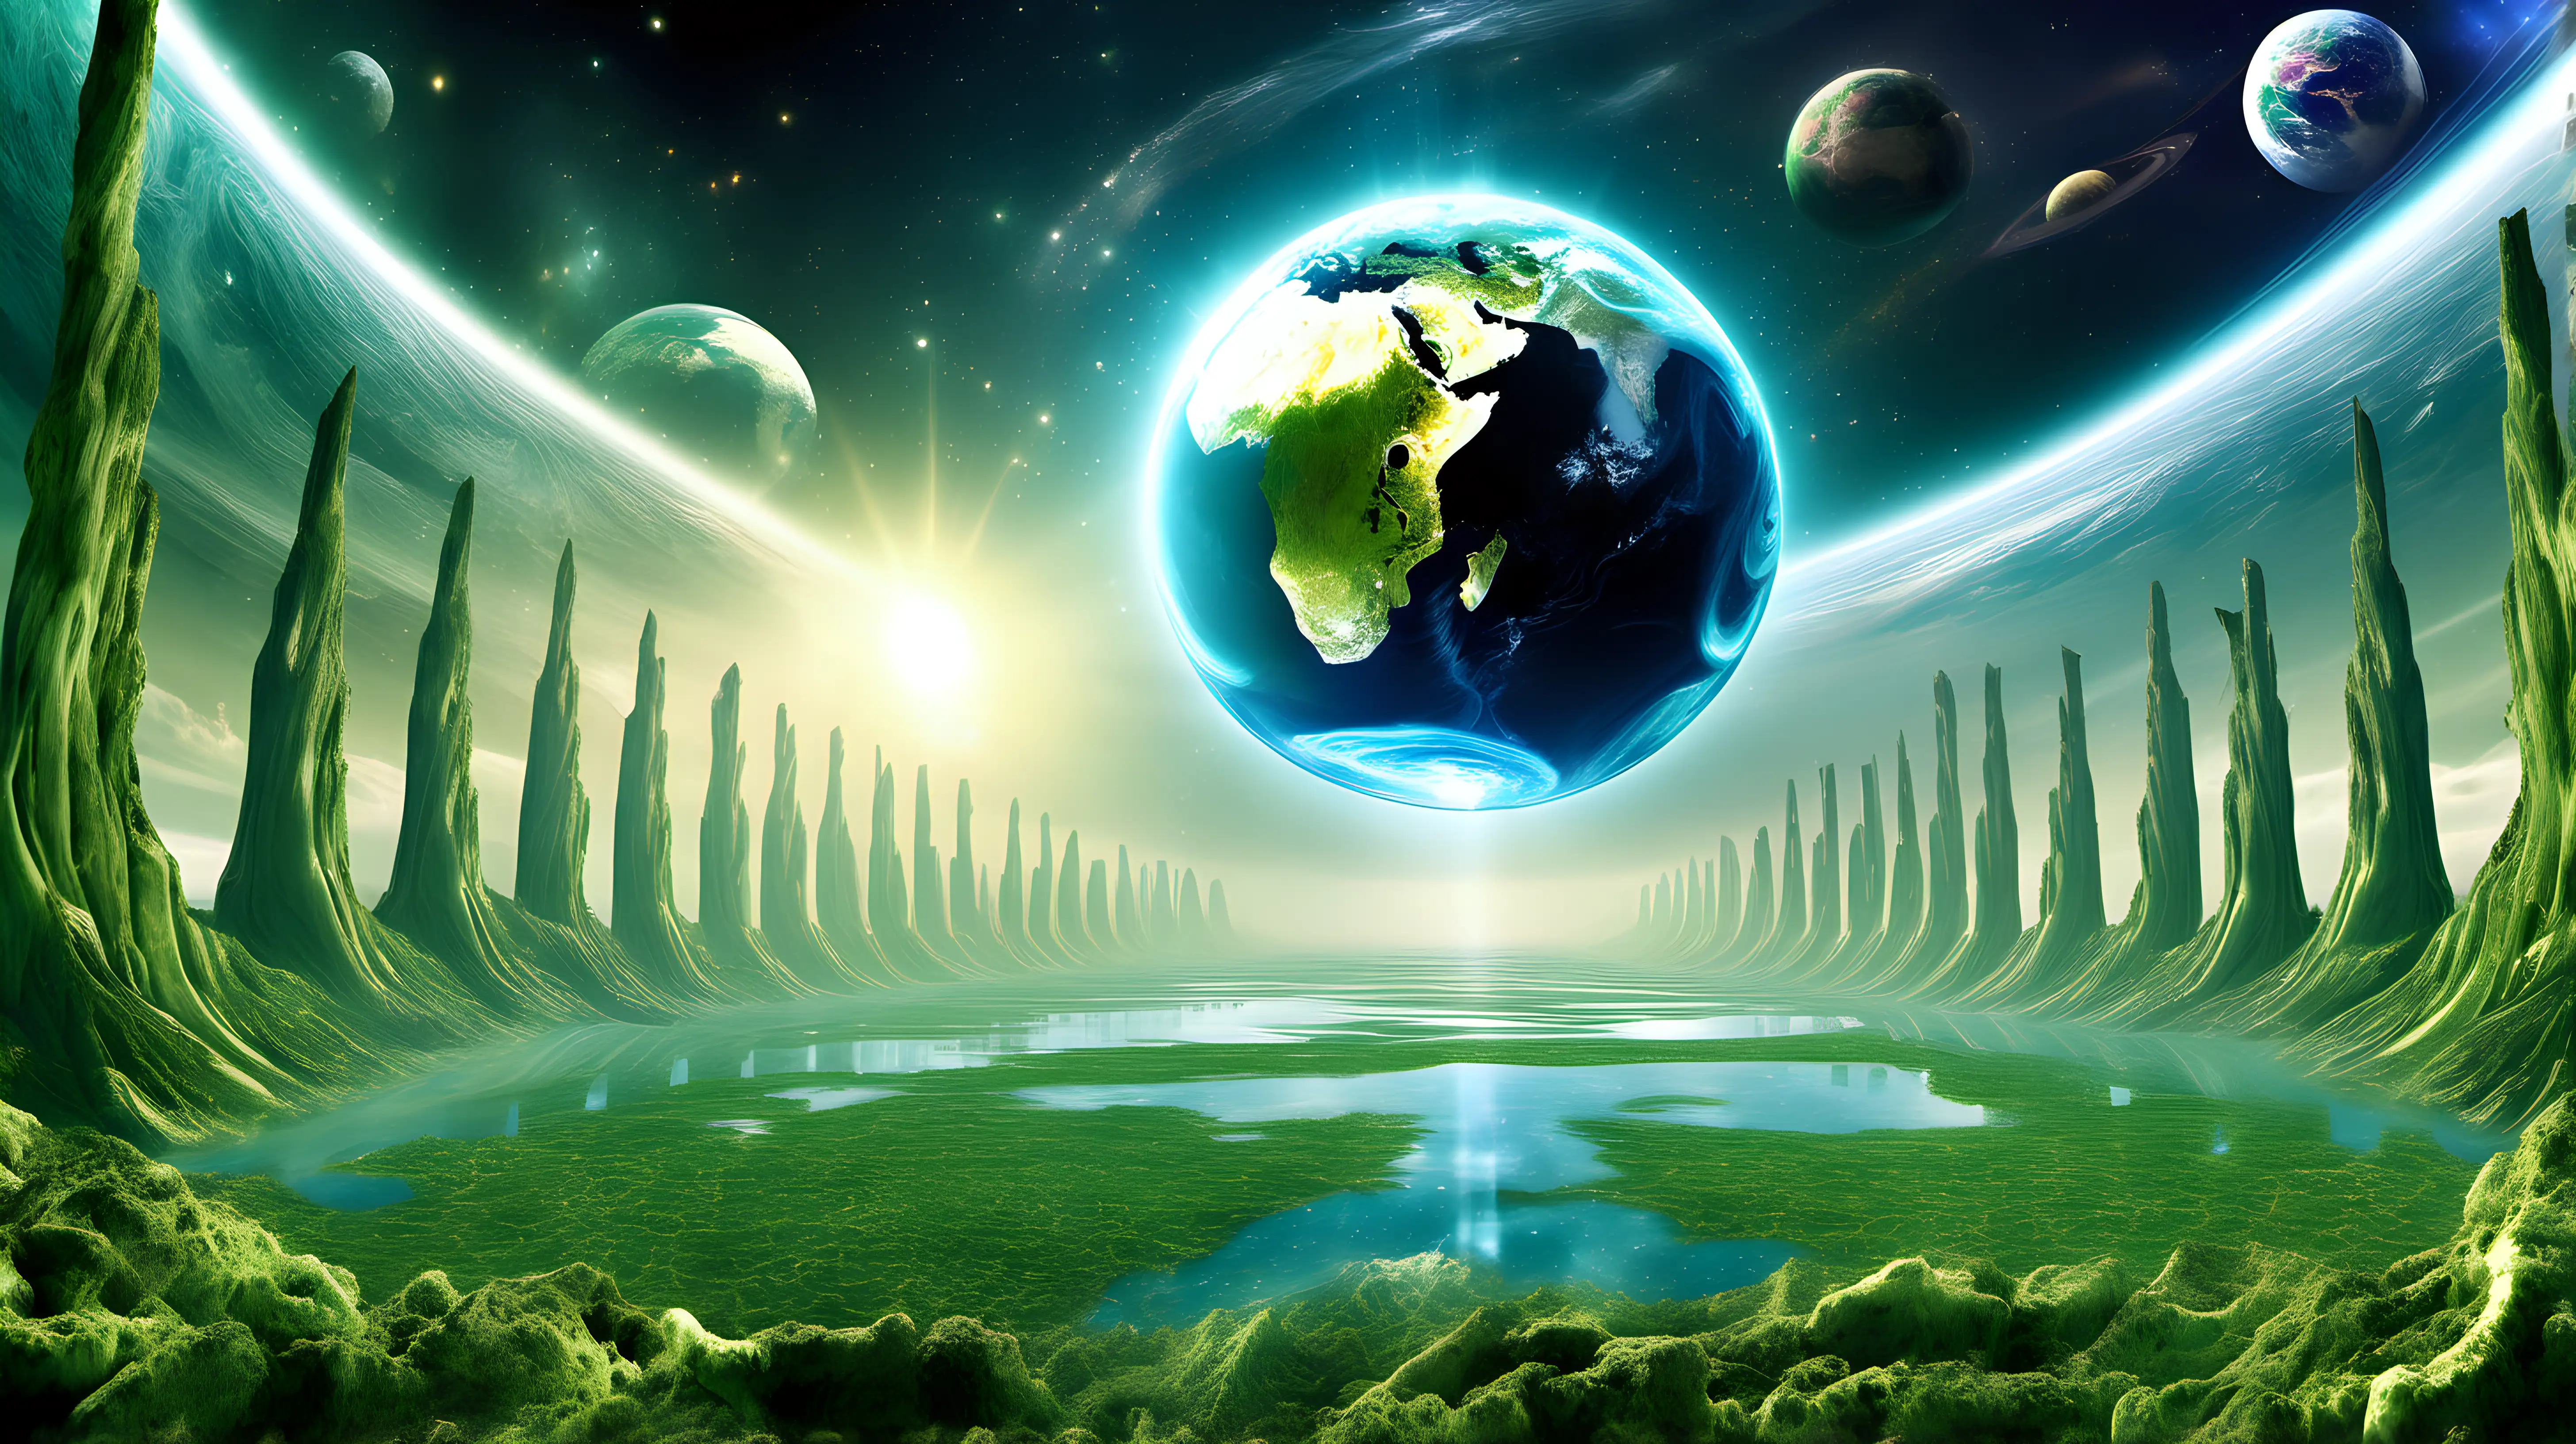 Imagine an intergalactic council assessing Earth's environmental record. Write a report or debate among cosmic representatives discussing whether humanity deserves a second chance on Earth Day